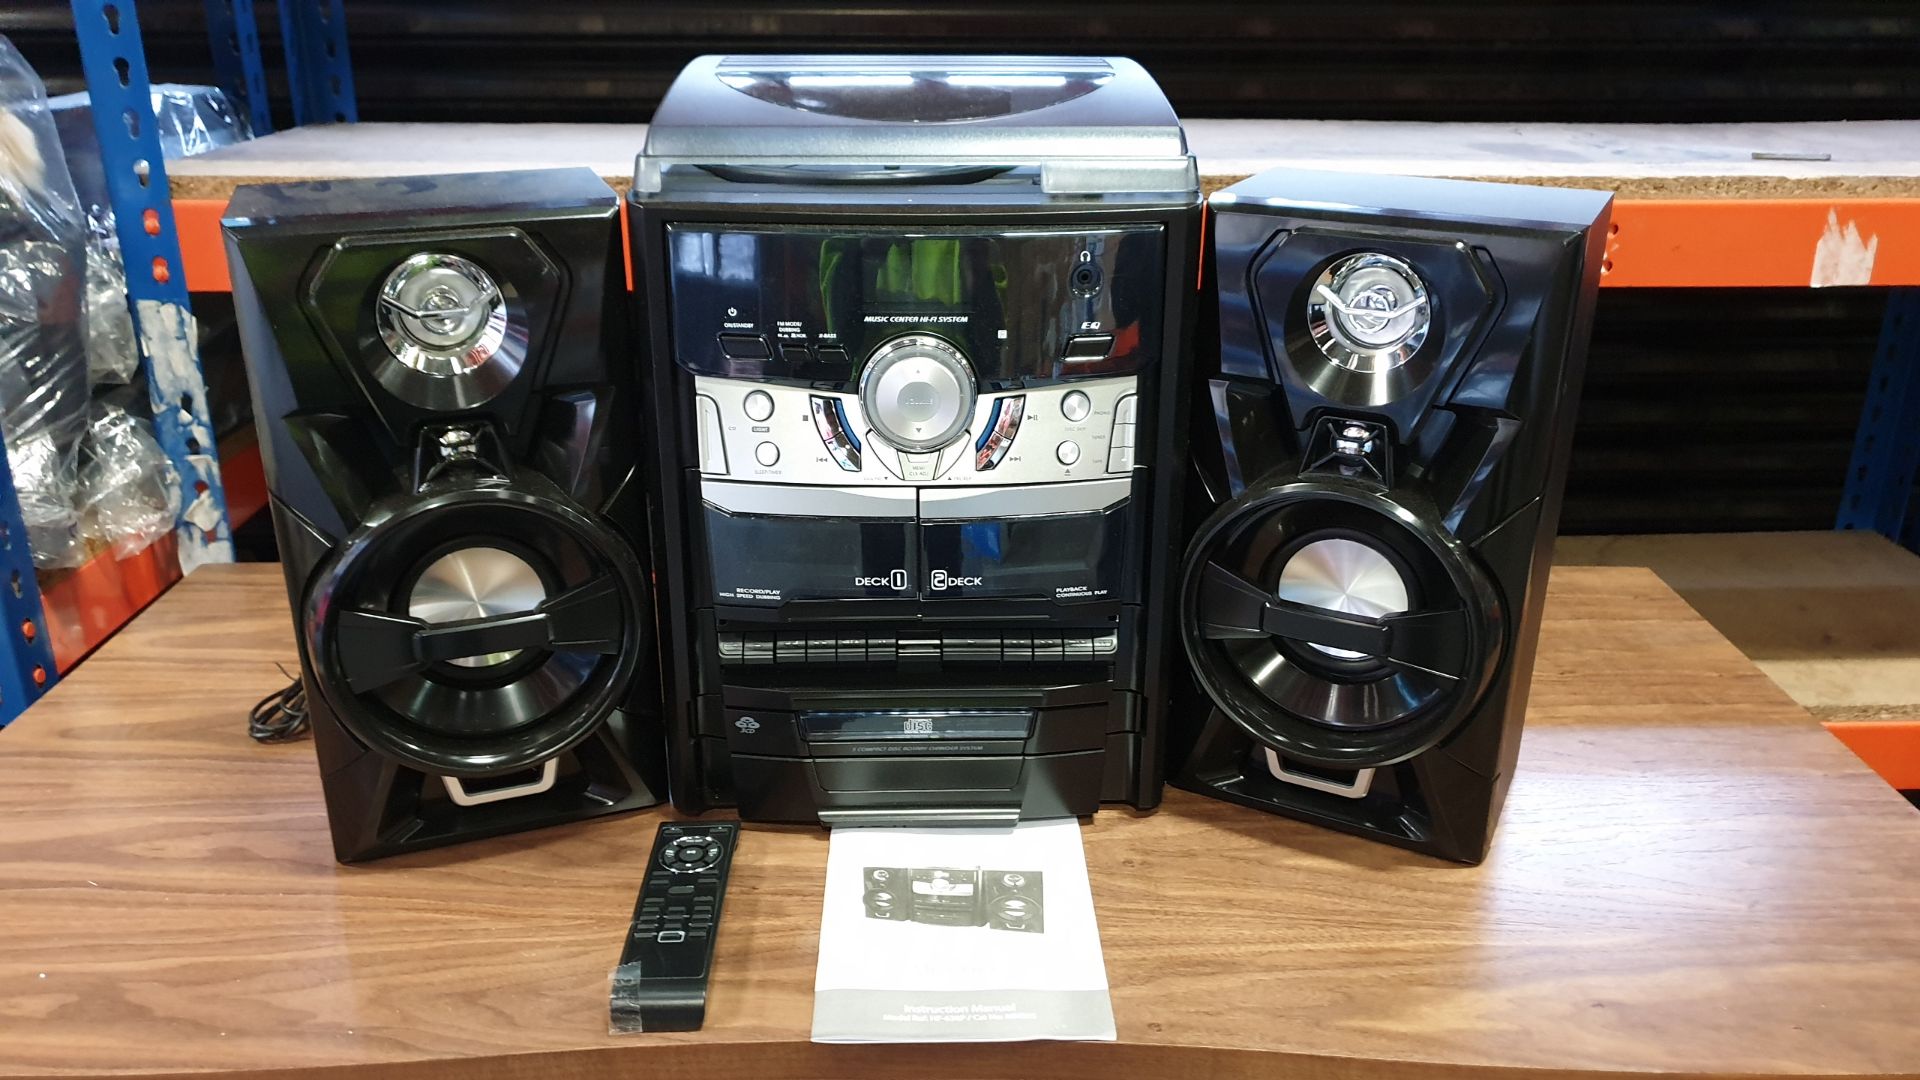 JDW MIDI HI-FI SOUND SYSTEM WITH 33-45 RPM SELECTABLE TURN TABLE, FRONT LOADING CD PLAYER, FM RADIO,